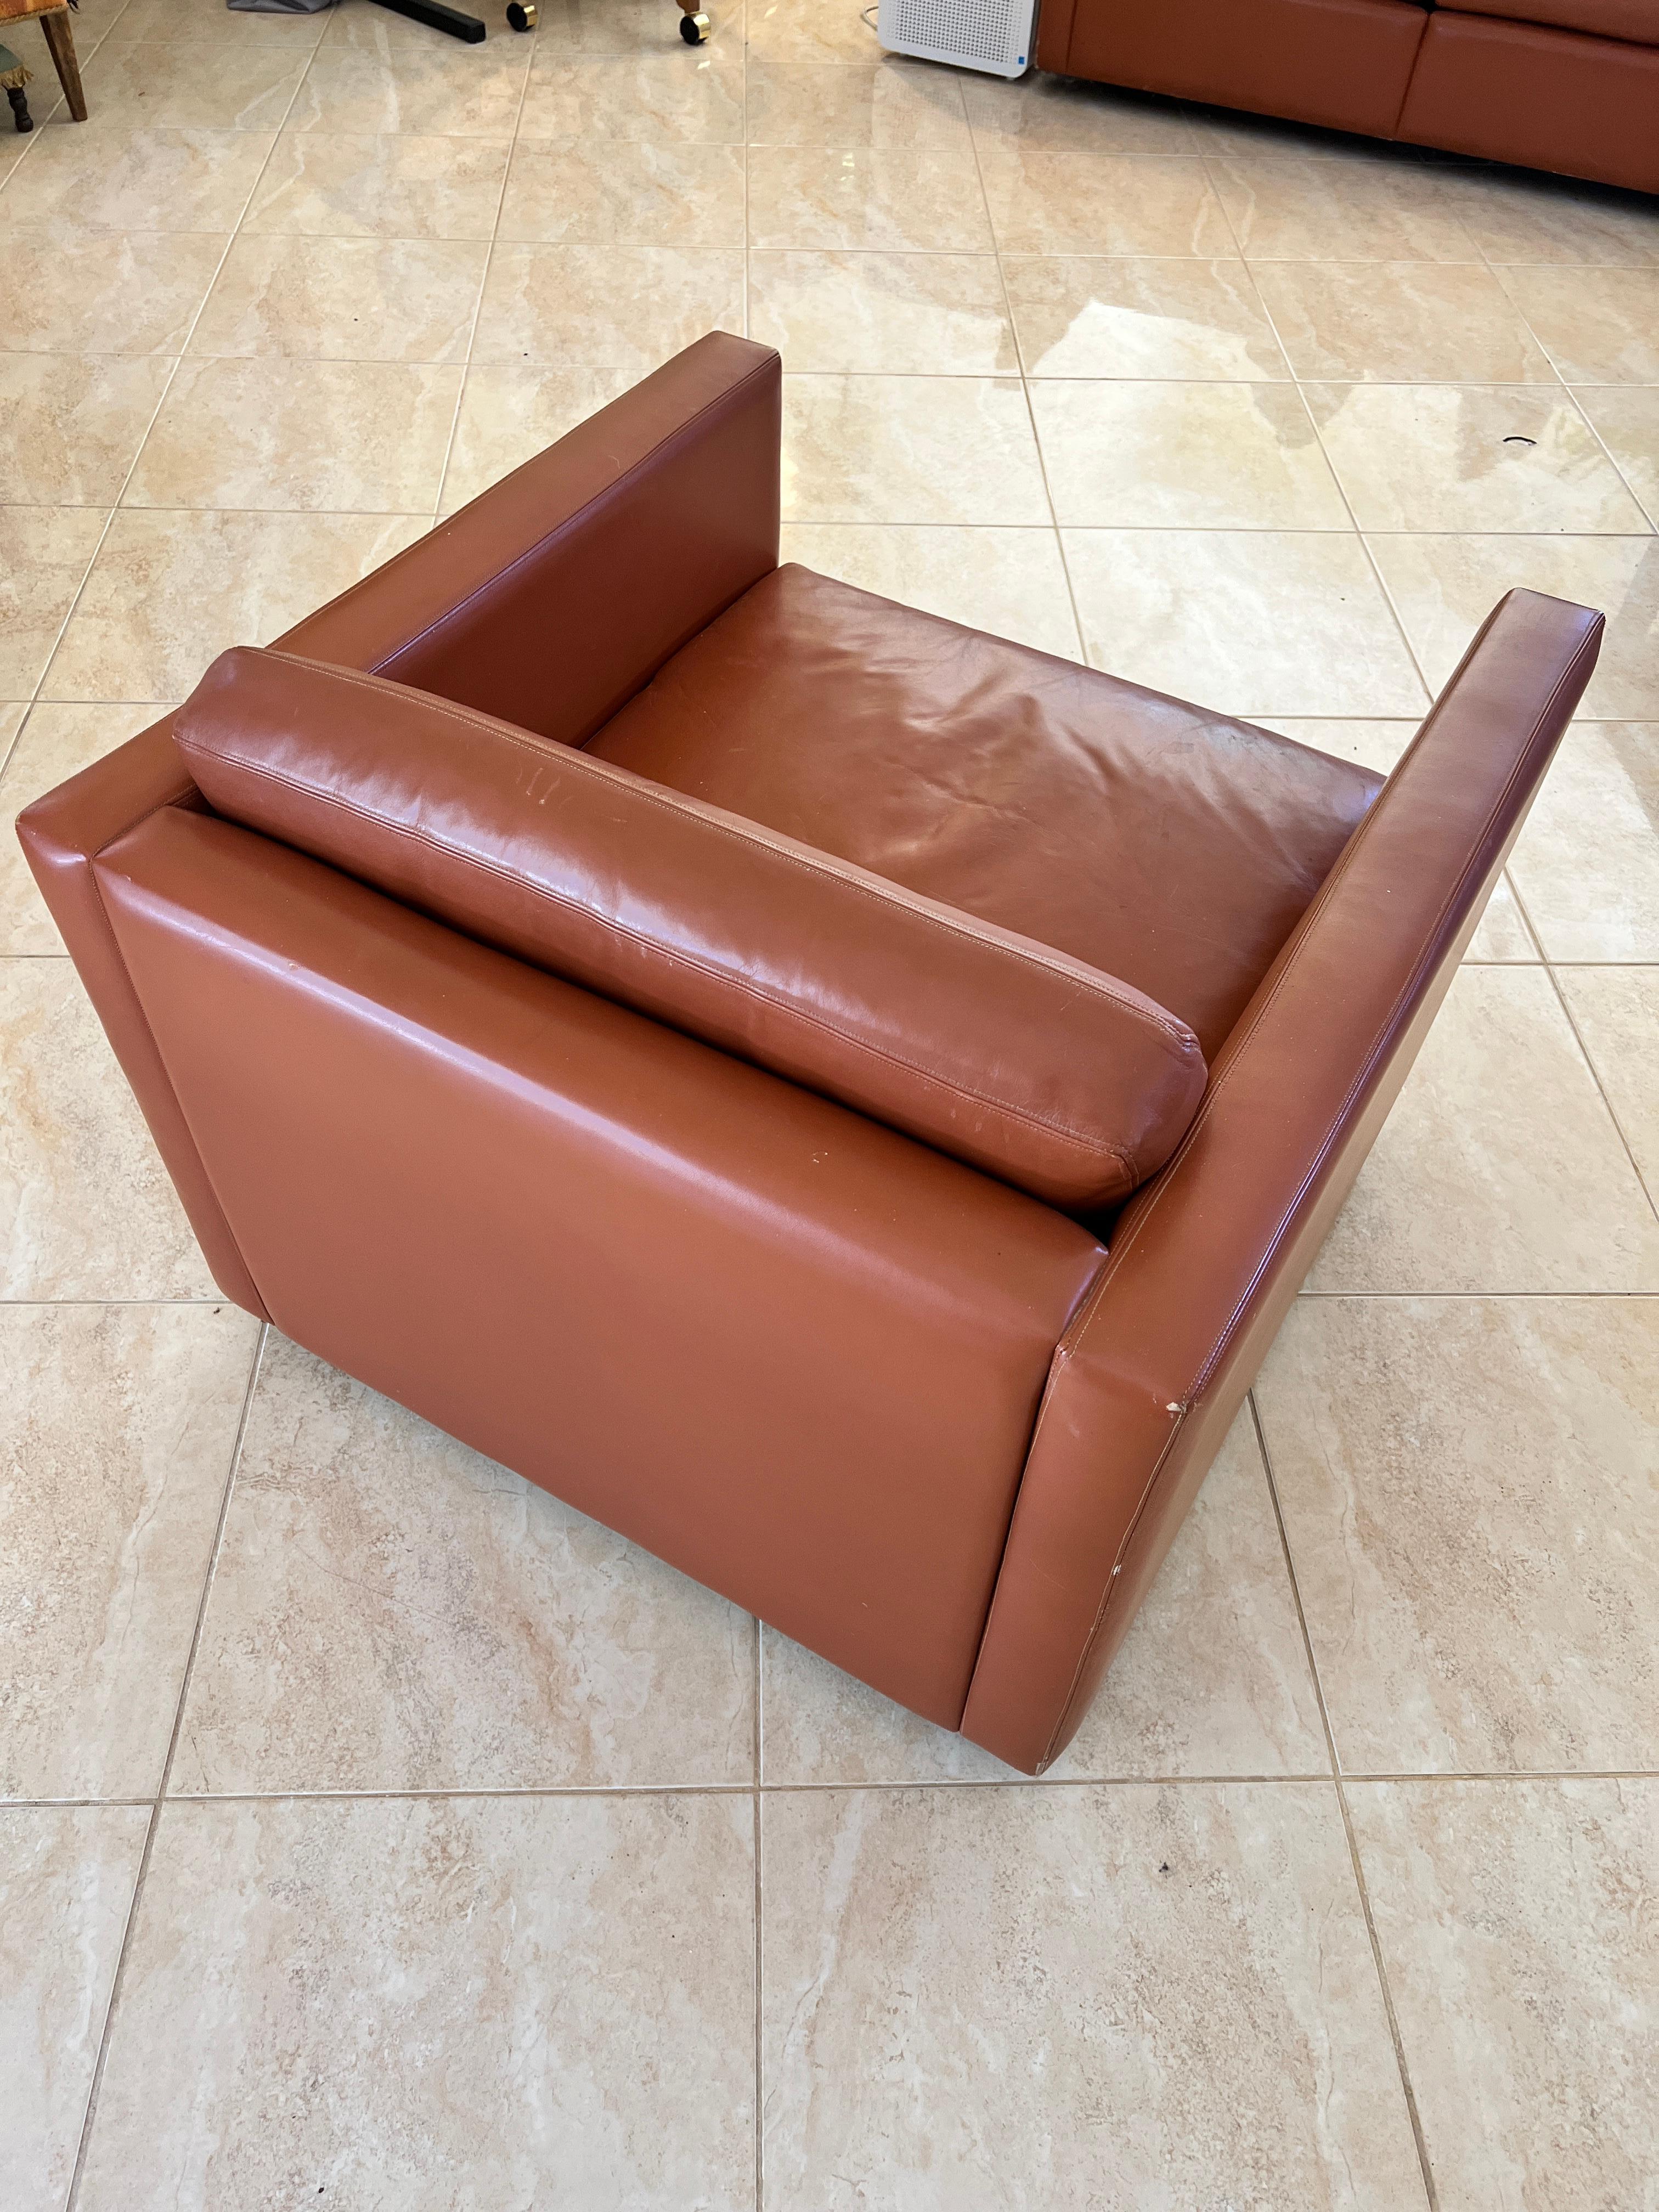 Mid-Century Modern Knoll Cube Lounge Chair by Charles Pfister 1971 Original Sabrina Leather, #1 For Sale